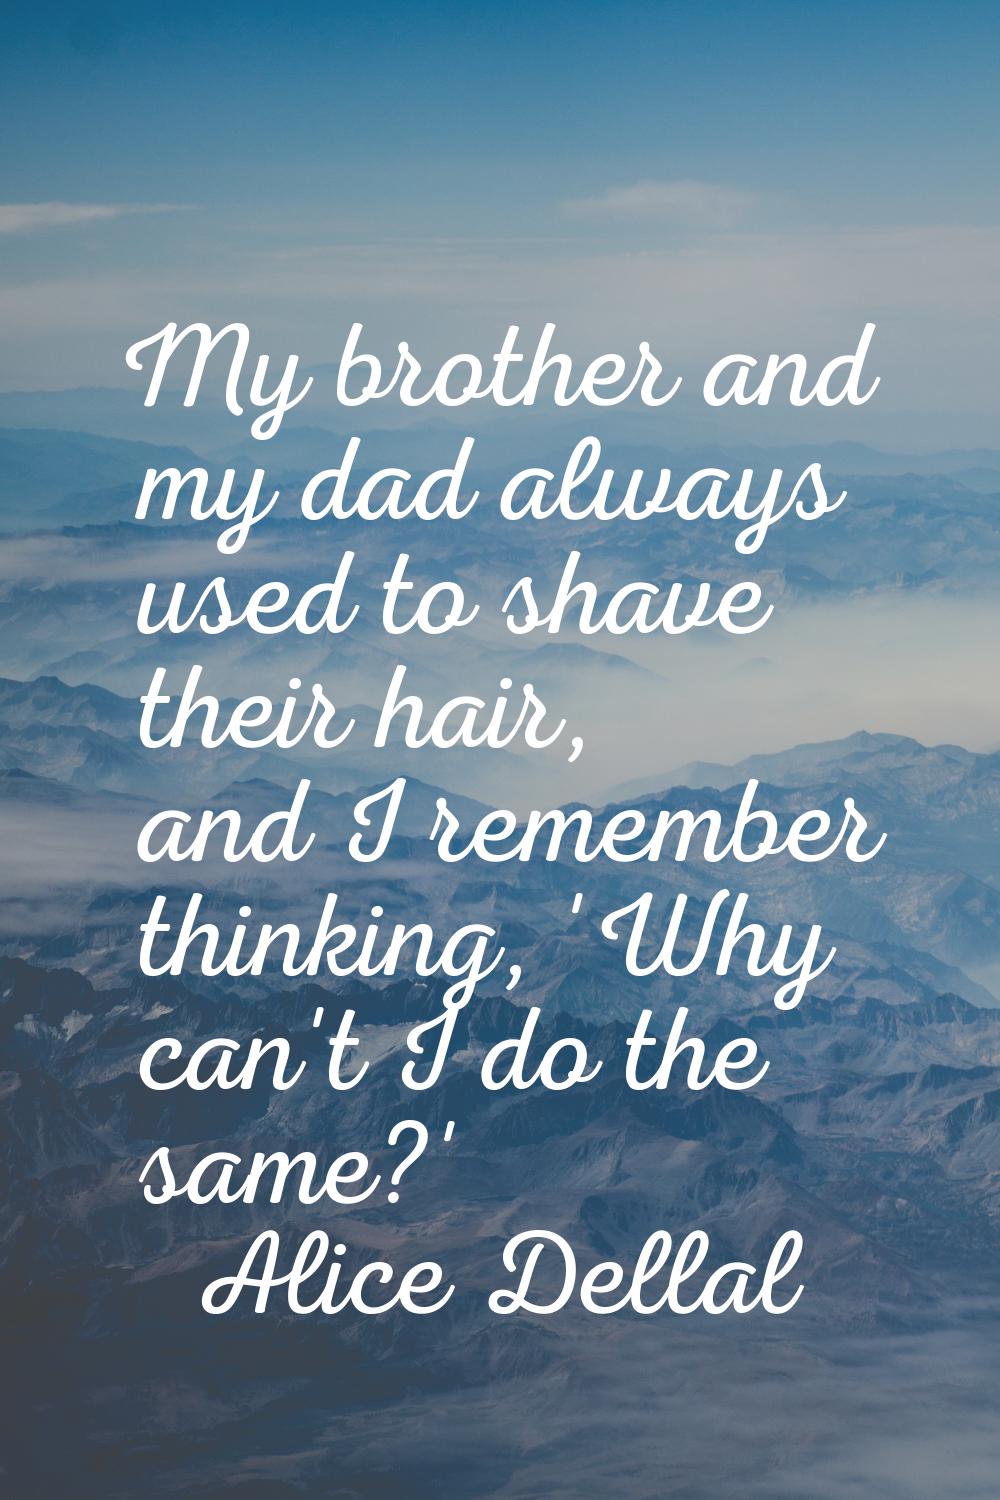 My brother and my dad always used to shave their hair, and I remember thinking, 'Why can't I do the